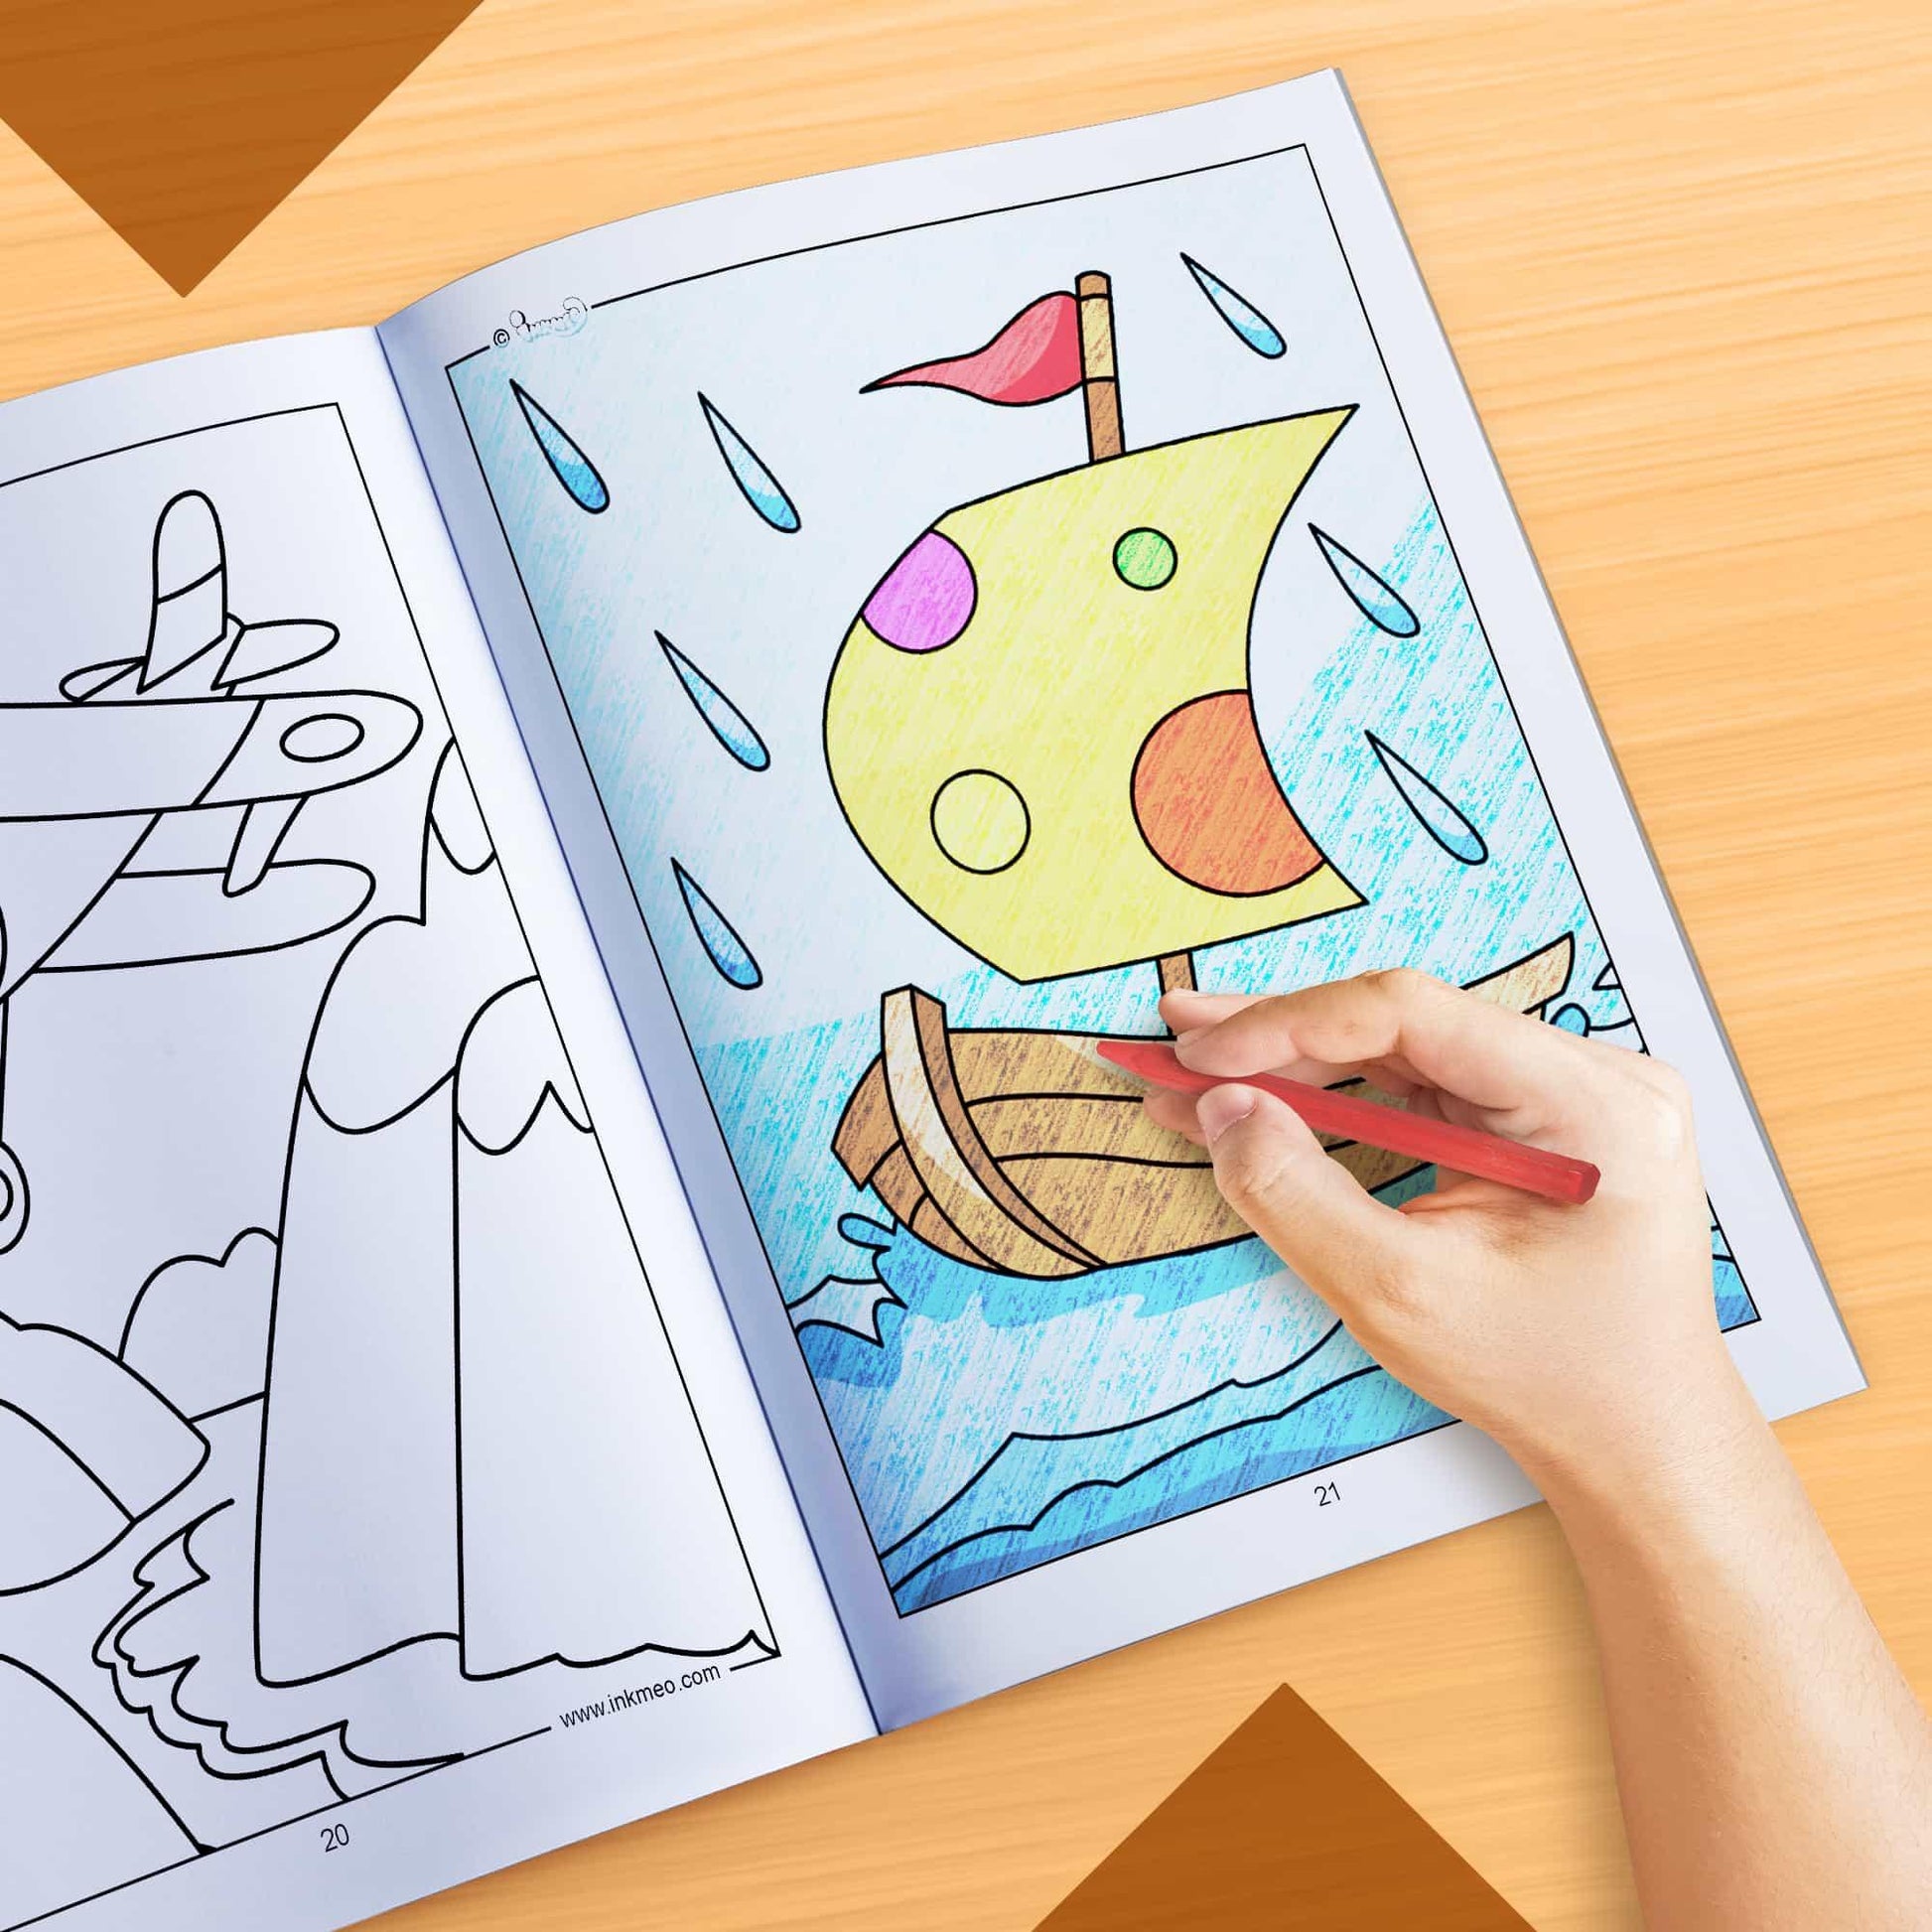 The image depicts a hand coloring a book with crayons.